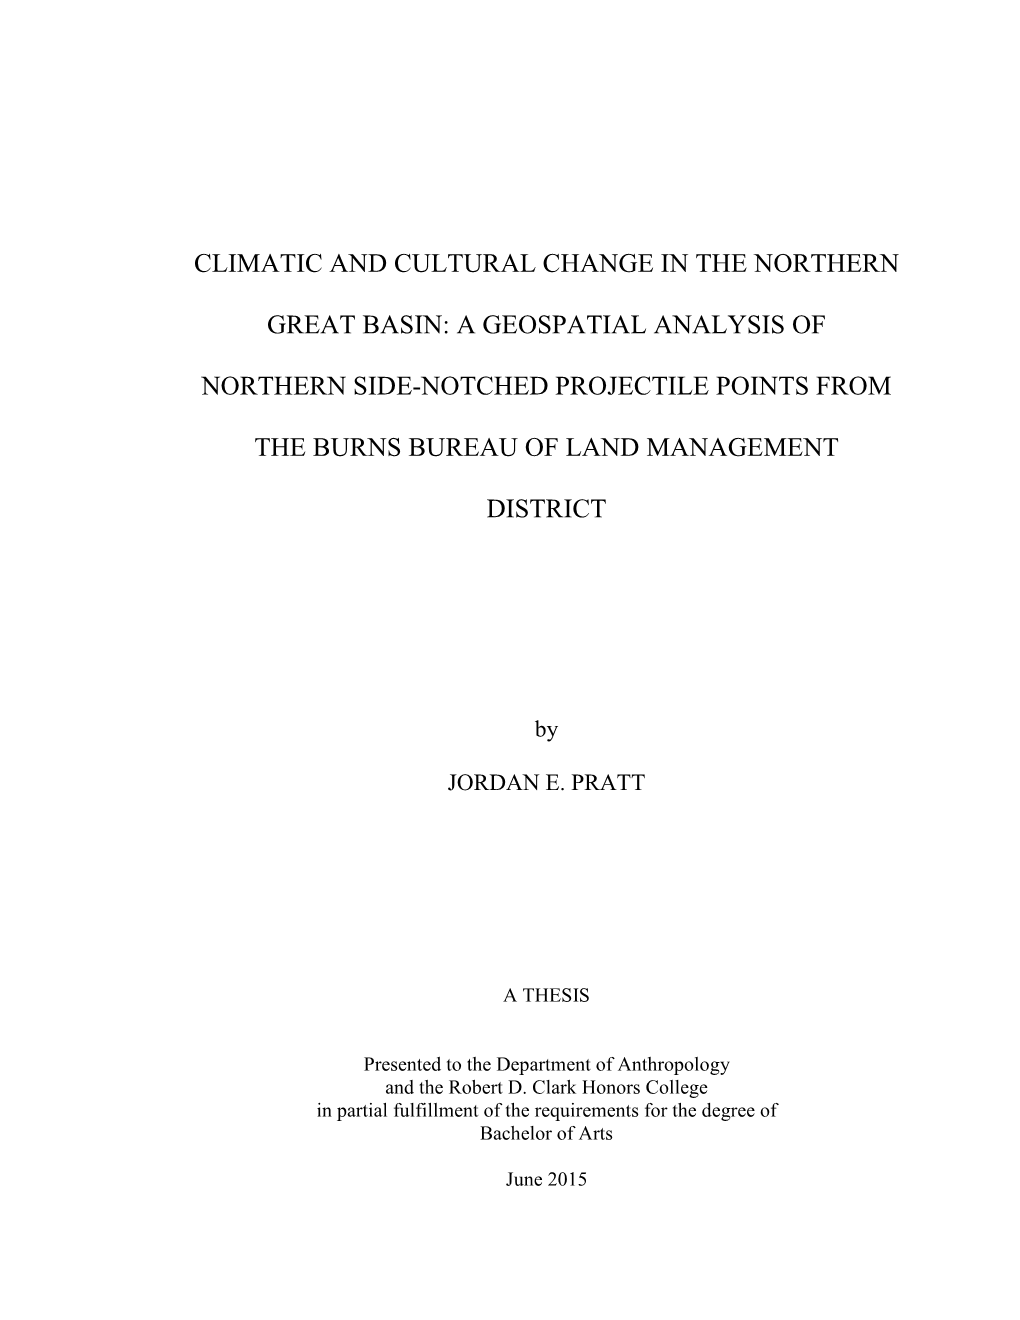 Climatic and Cultural Change in the Northern Great